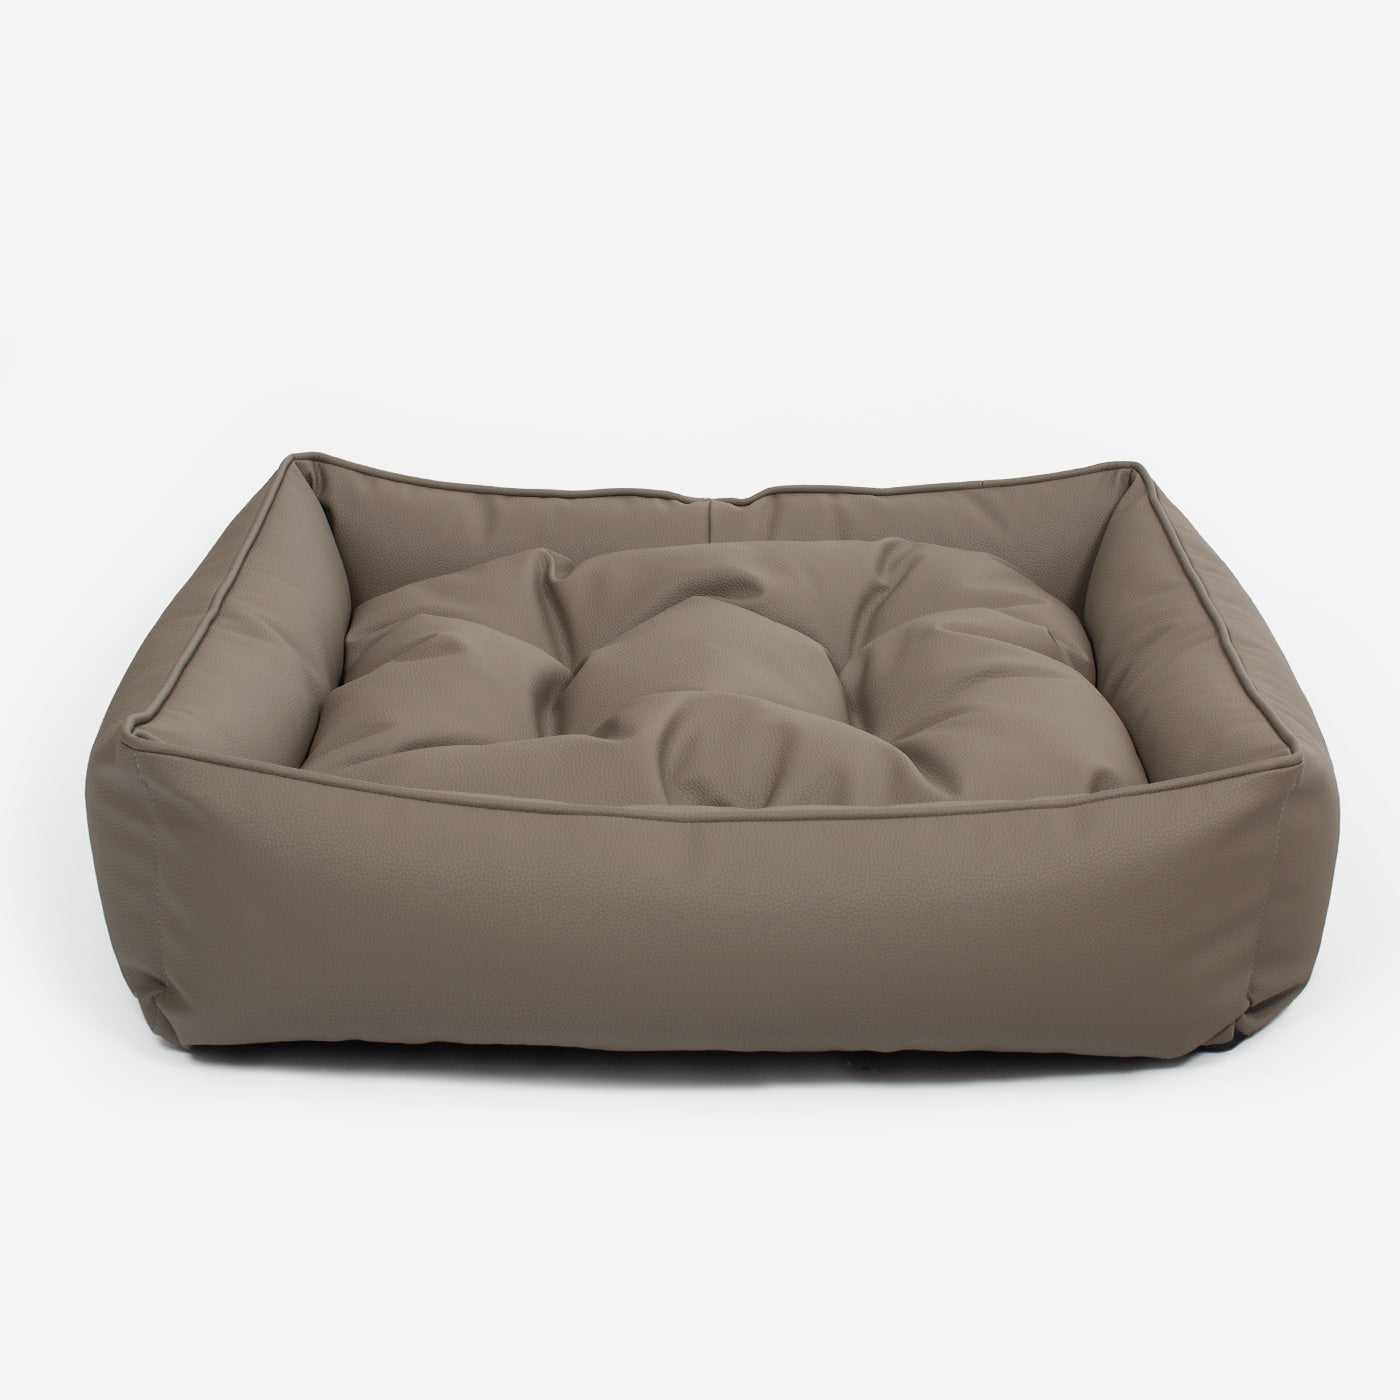 [color:camel] Luxury Handmade Box Bed in Rhino Tough Faux Leather, in Camel, Perfect For Your Pets Nap Time! Available To Personalise at Lords & Labradors